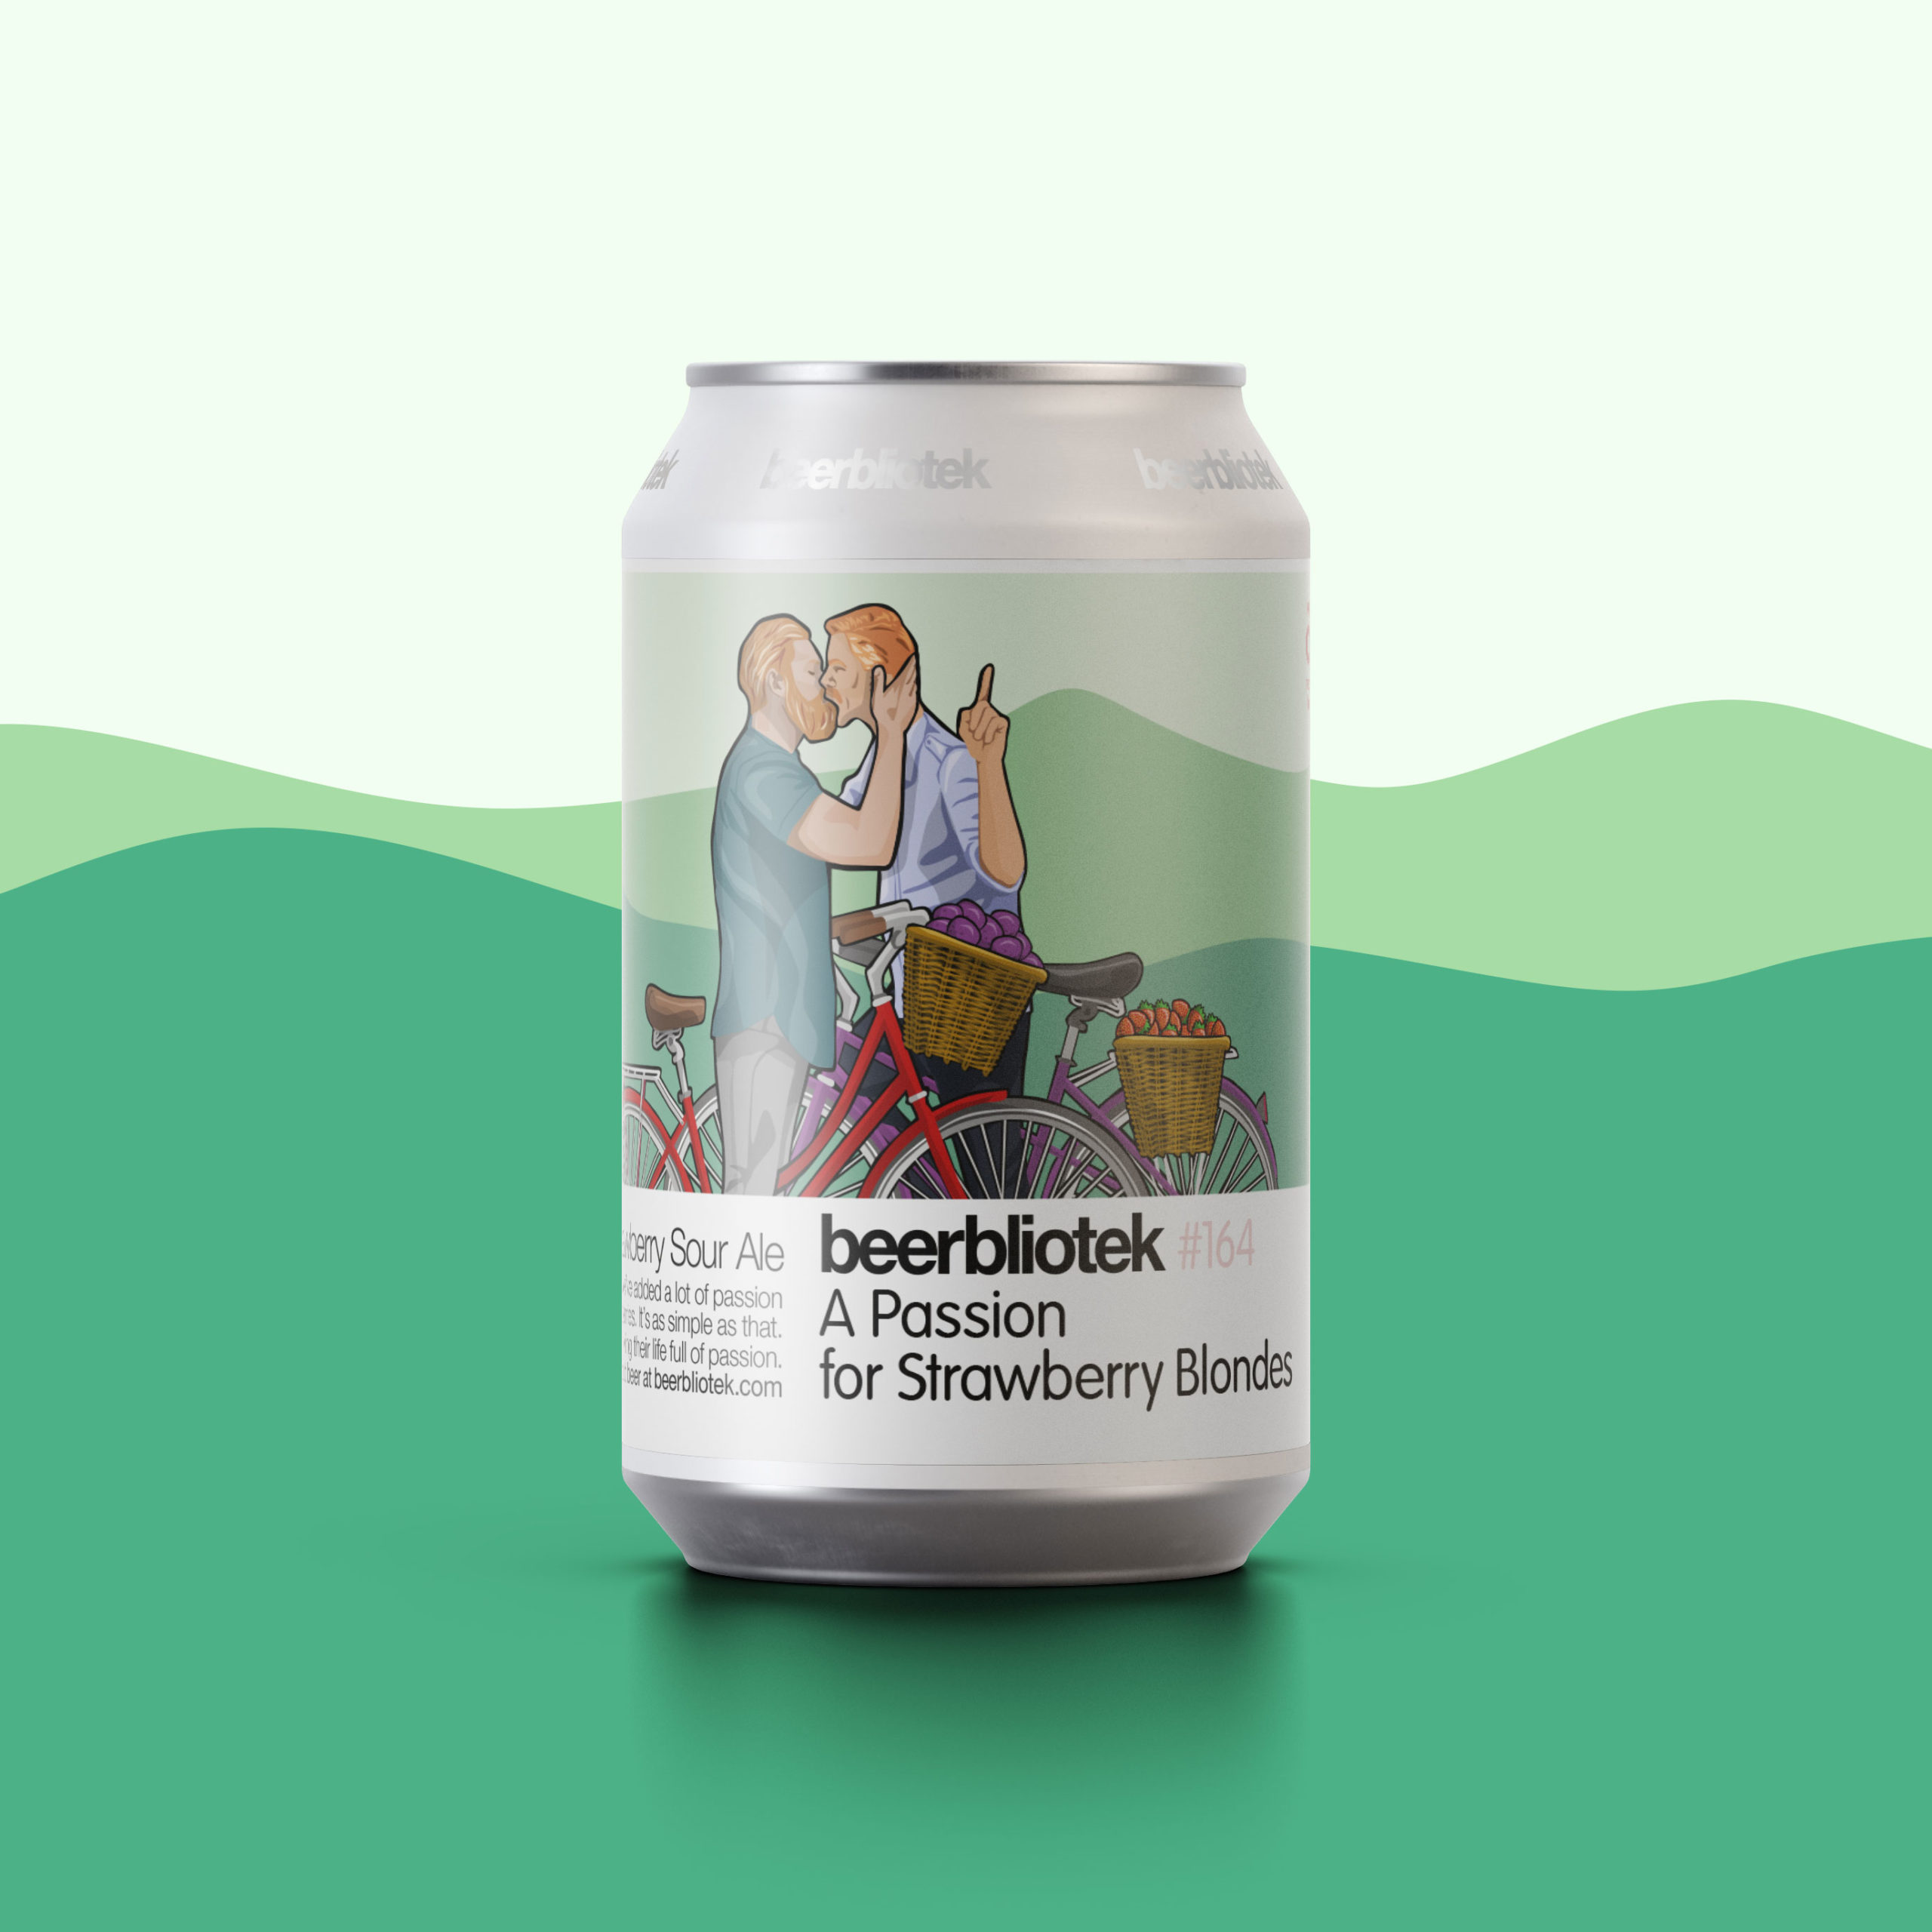 A can marketing packshot of "A Passion for Strawberry Blondes", a Berliner Weisse with Passion Fruit and Strawberries. Brewed by Swedish Craft Beer brewery, Beebrliotek, in Gothenburg.